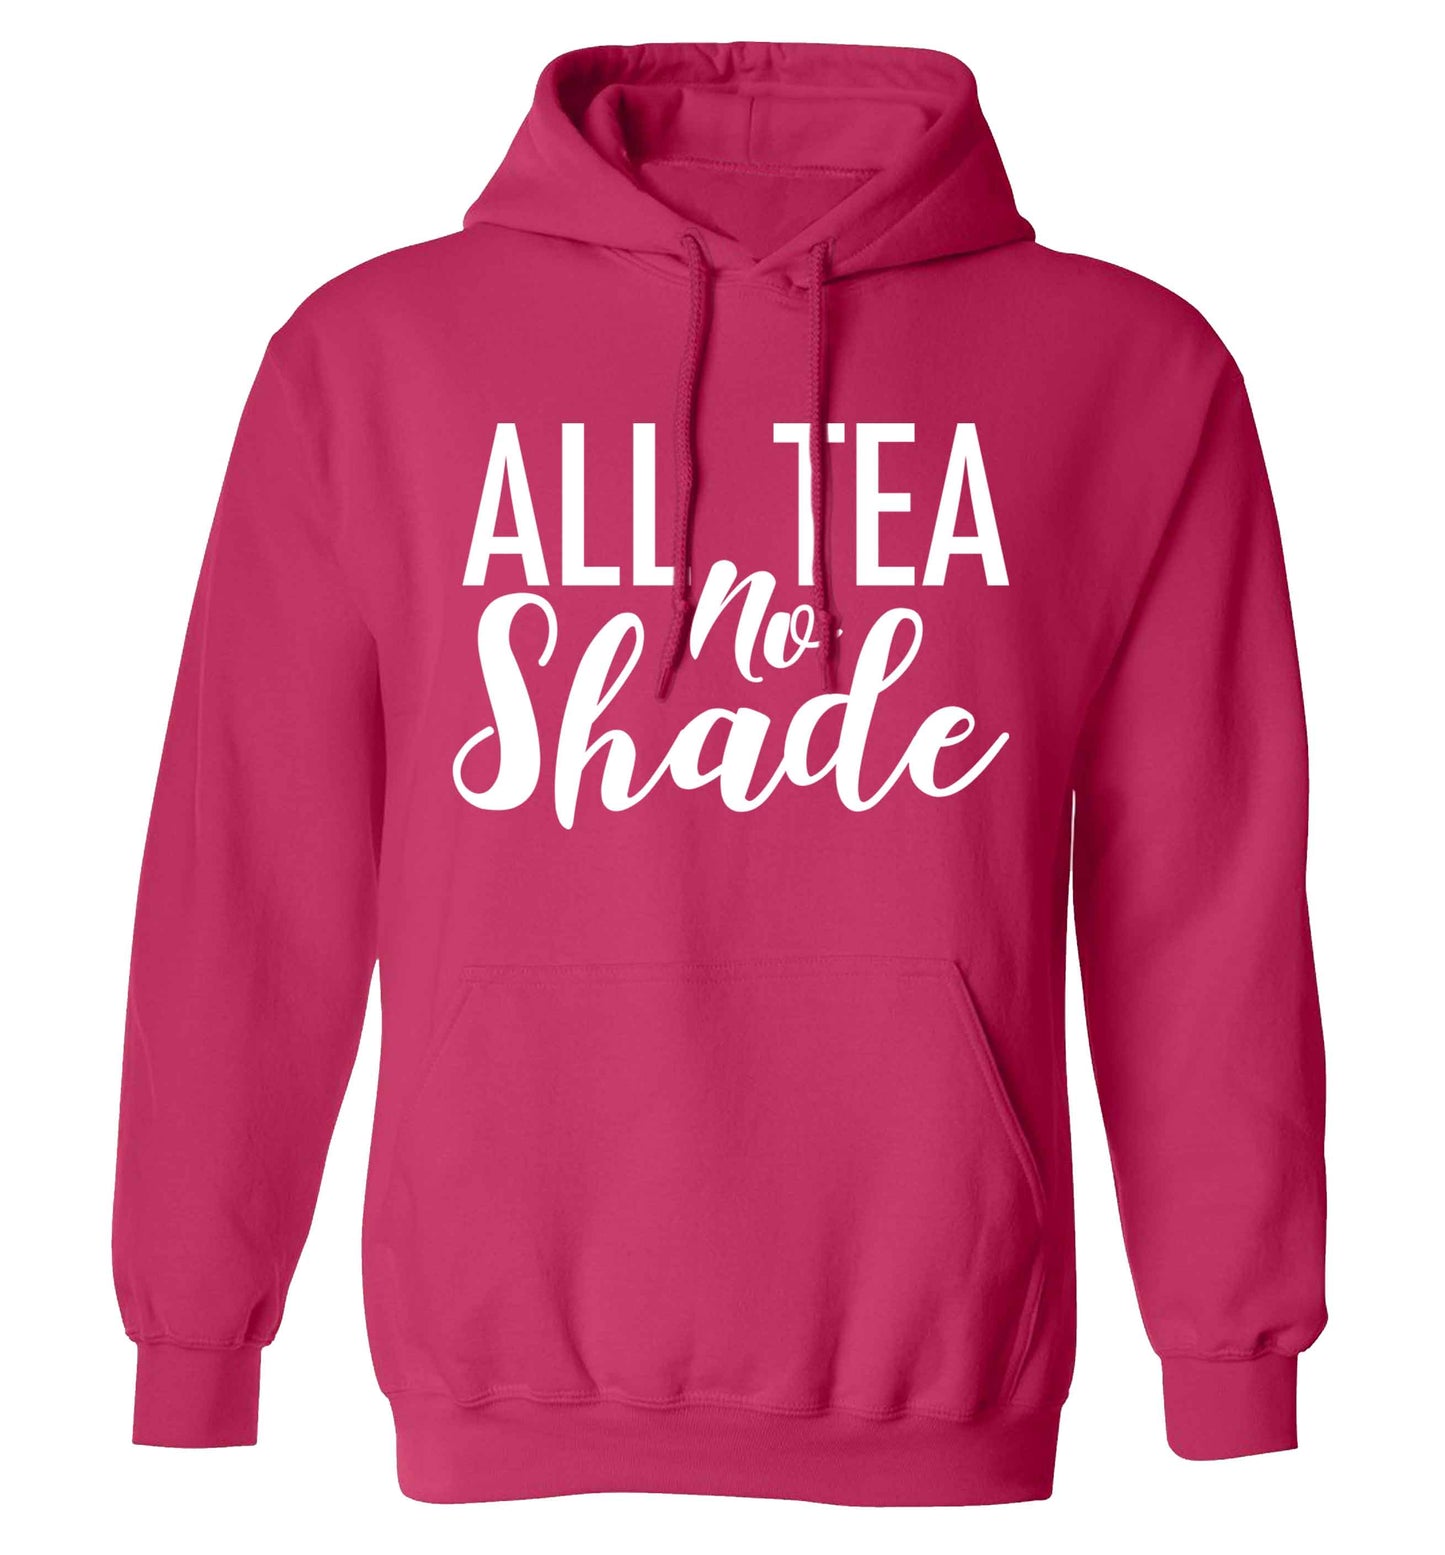 All tea no shade adults unisex pink hoodie 2XL